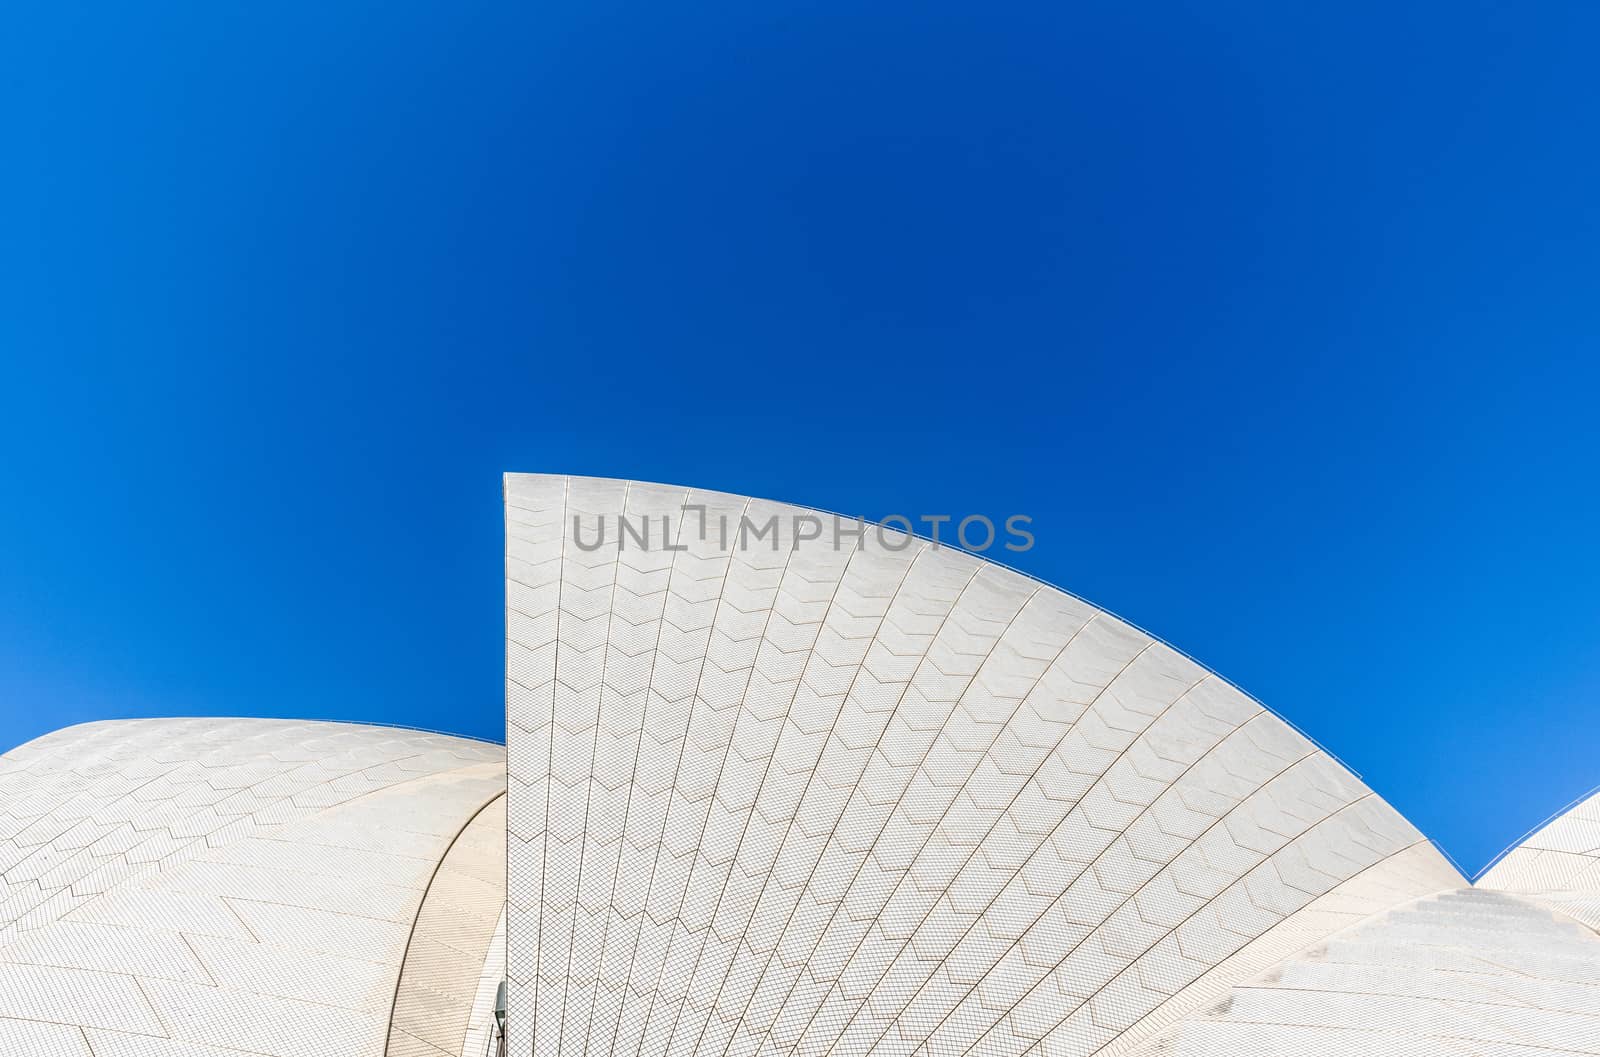 Sydney, Australia - February 11, 2019: Detail of white roof structure of Sydney Opera House against deep blue sky. 1 of 12.